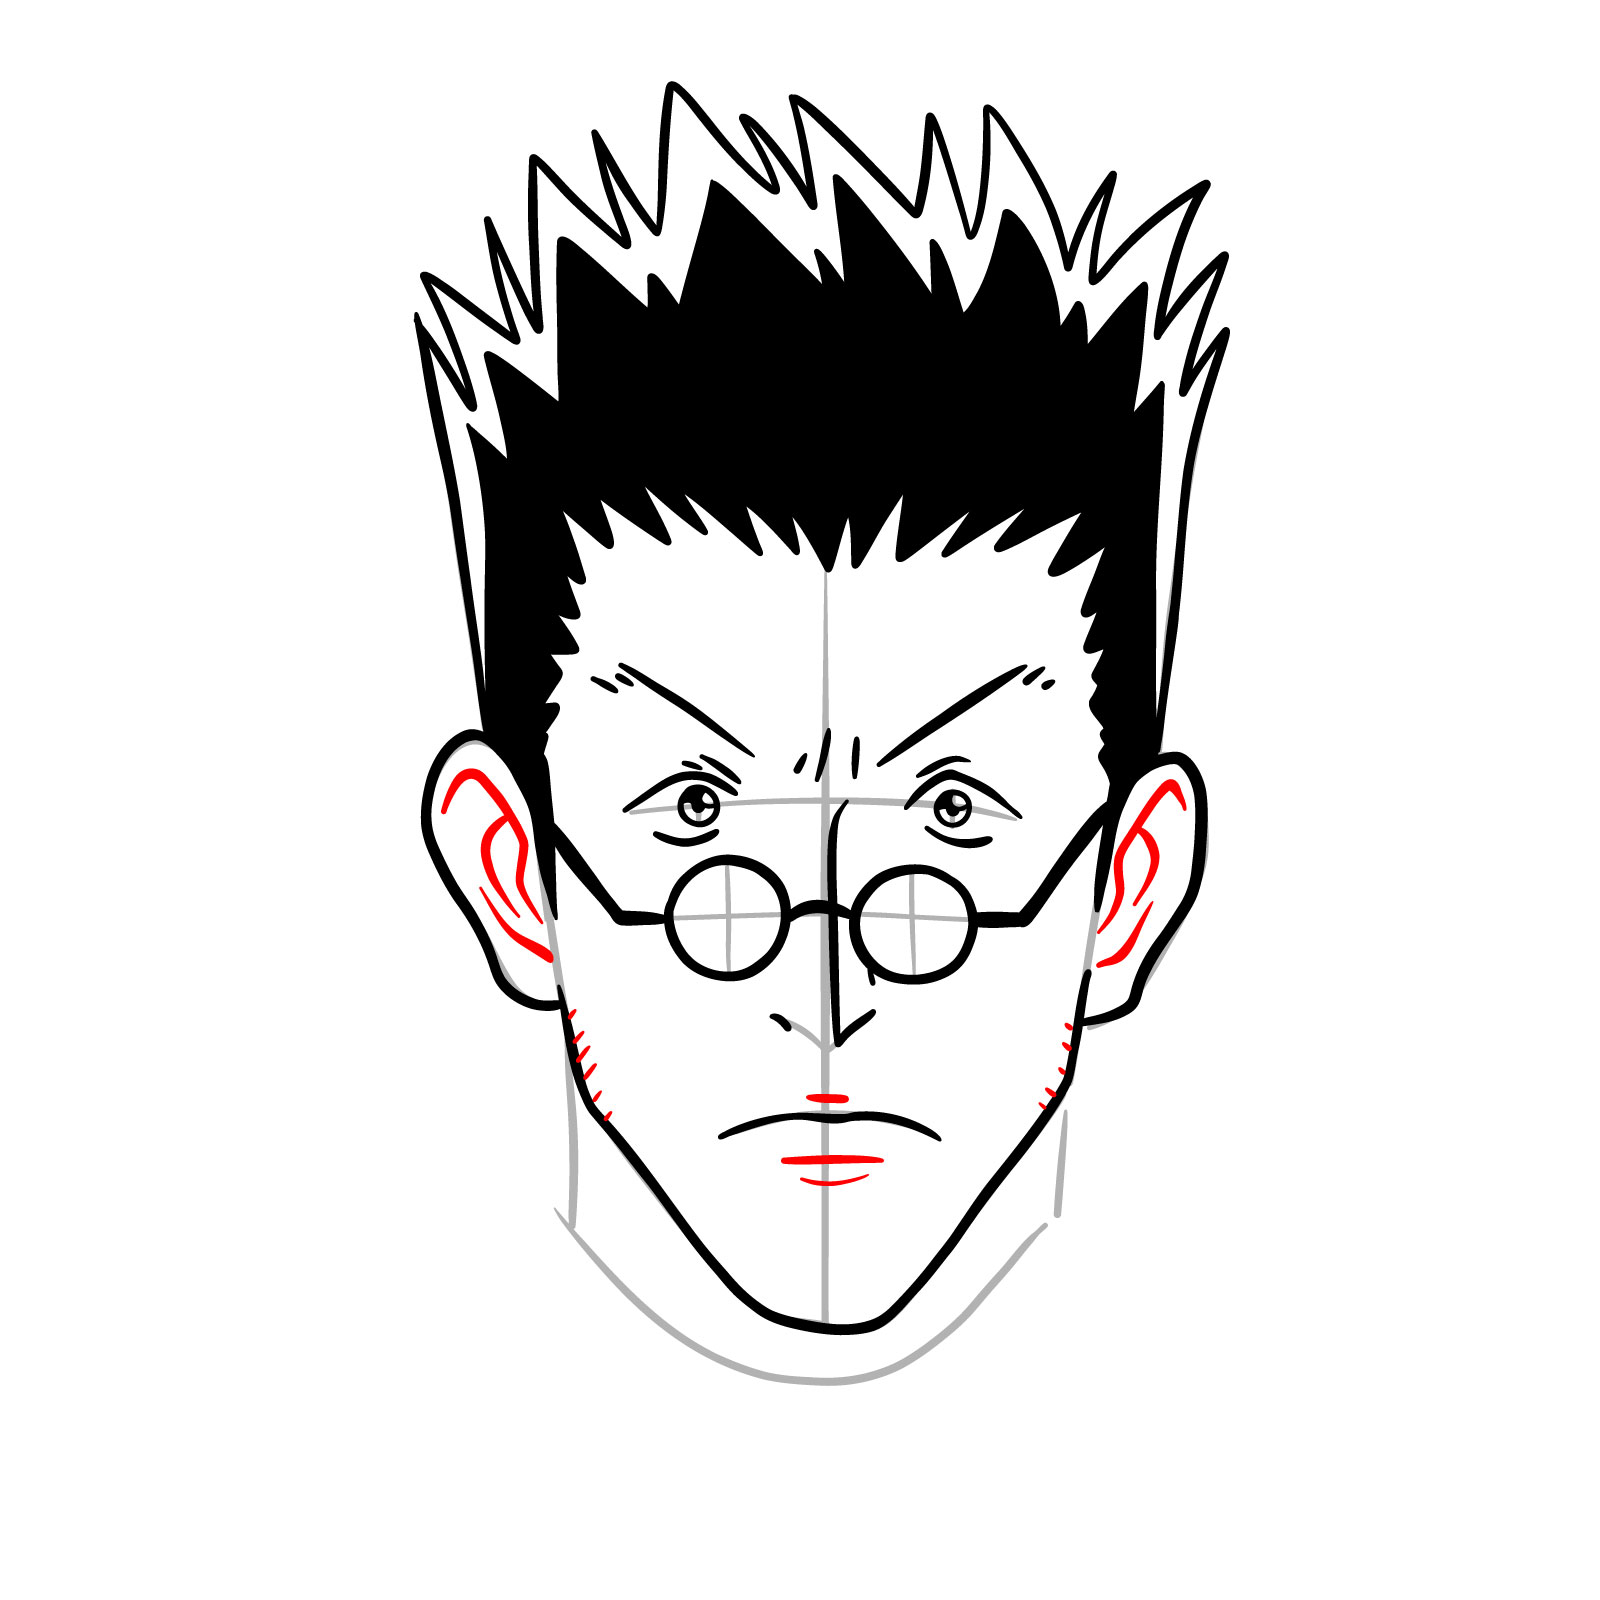 How to draw Leorio's face - Hunter x Hunter - step 15